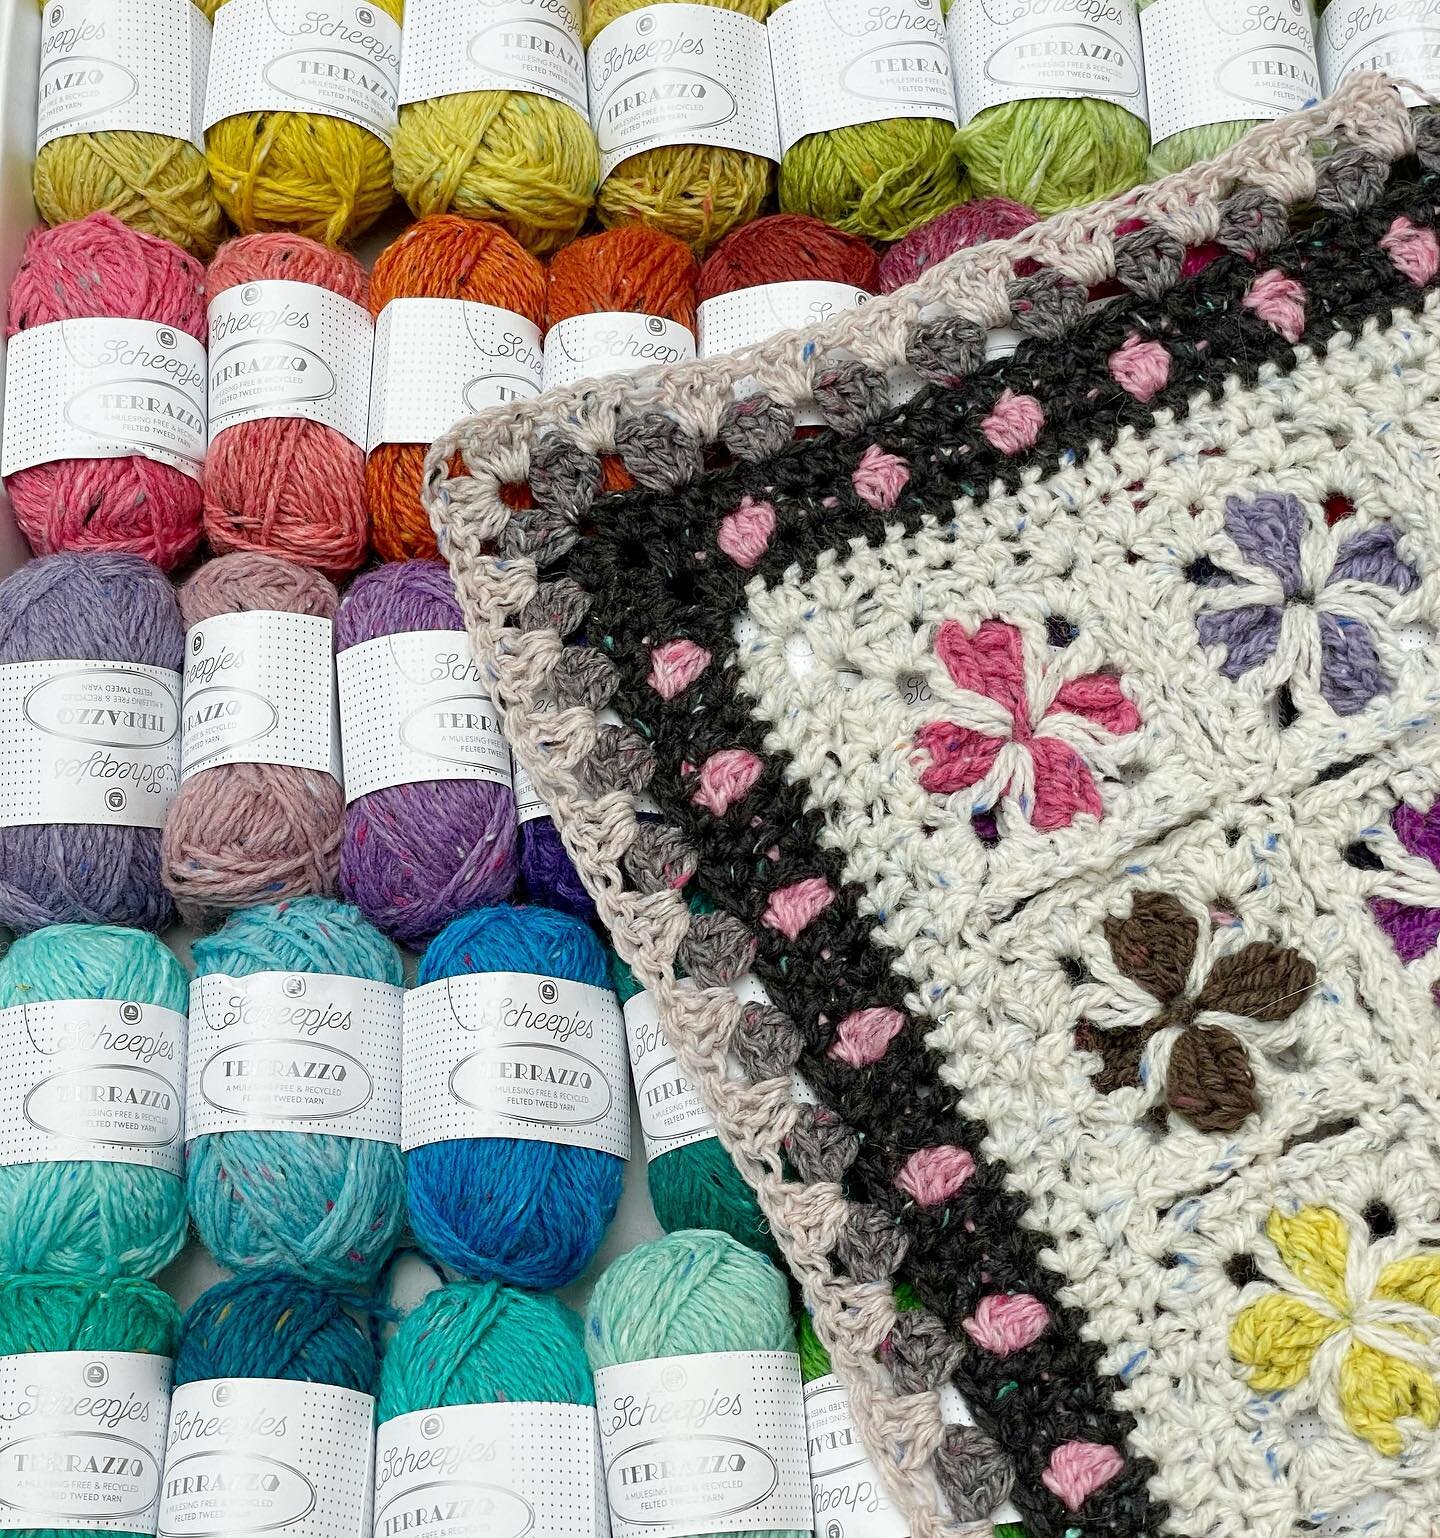 Pure joy to be working with this glorious yarn pack from @scheepjes which will magically transform into a colourful blanket just in time for autumn! 
.
Yarn: @scheepjes Terrazzo
.
#crochetblanket #colorfulcrochet #colourfulcrochet #terrazzocolourpack